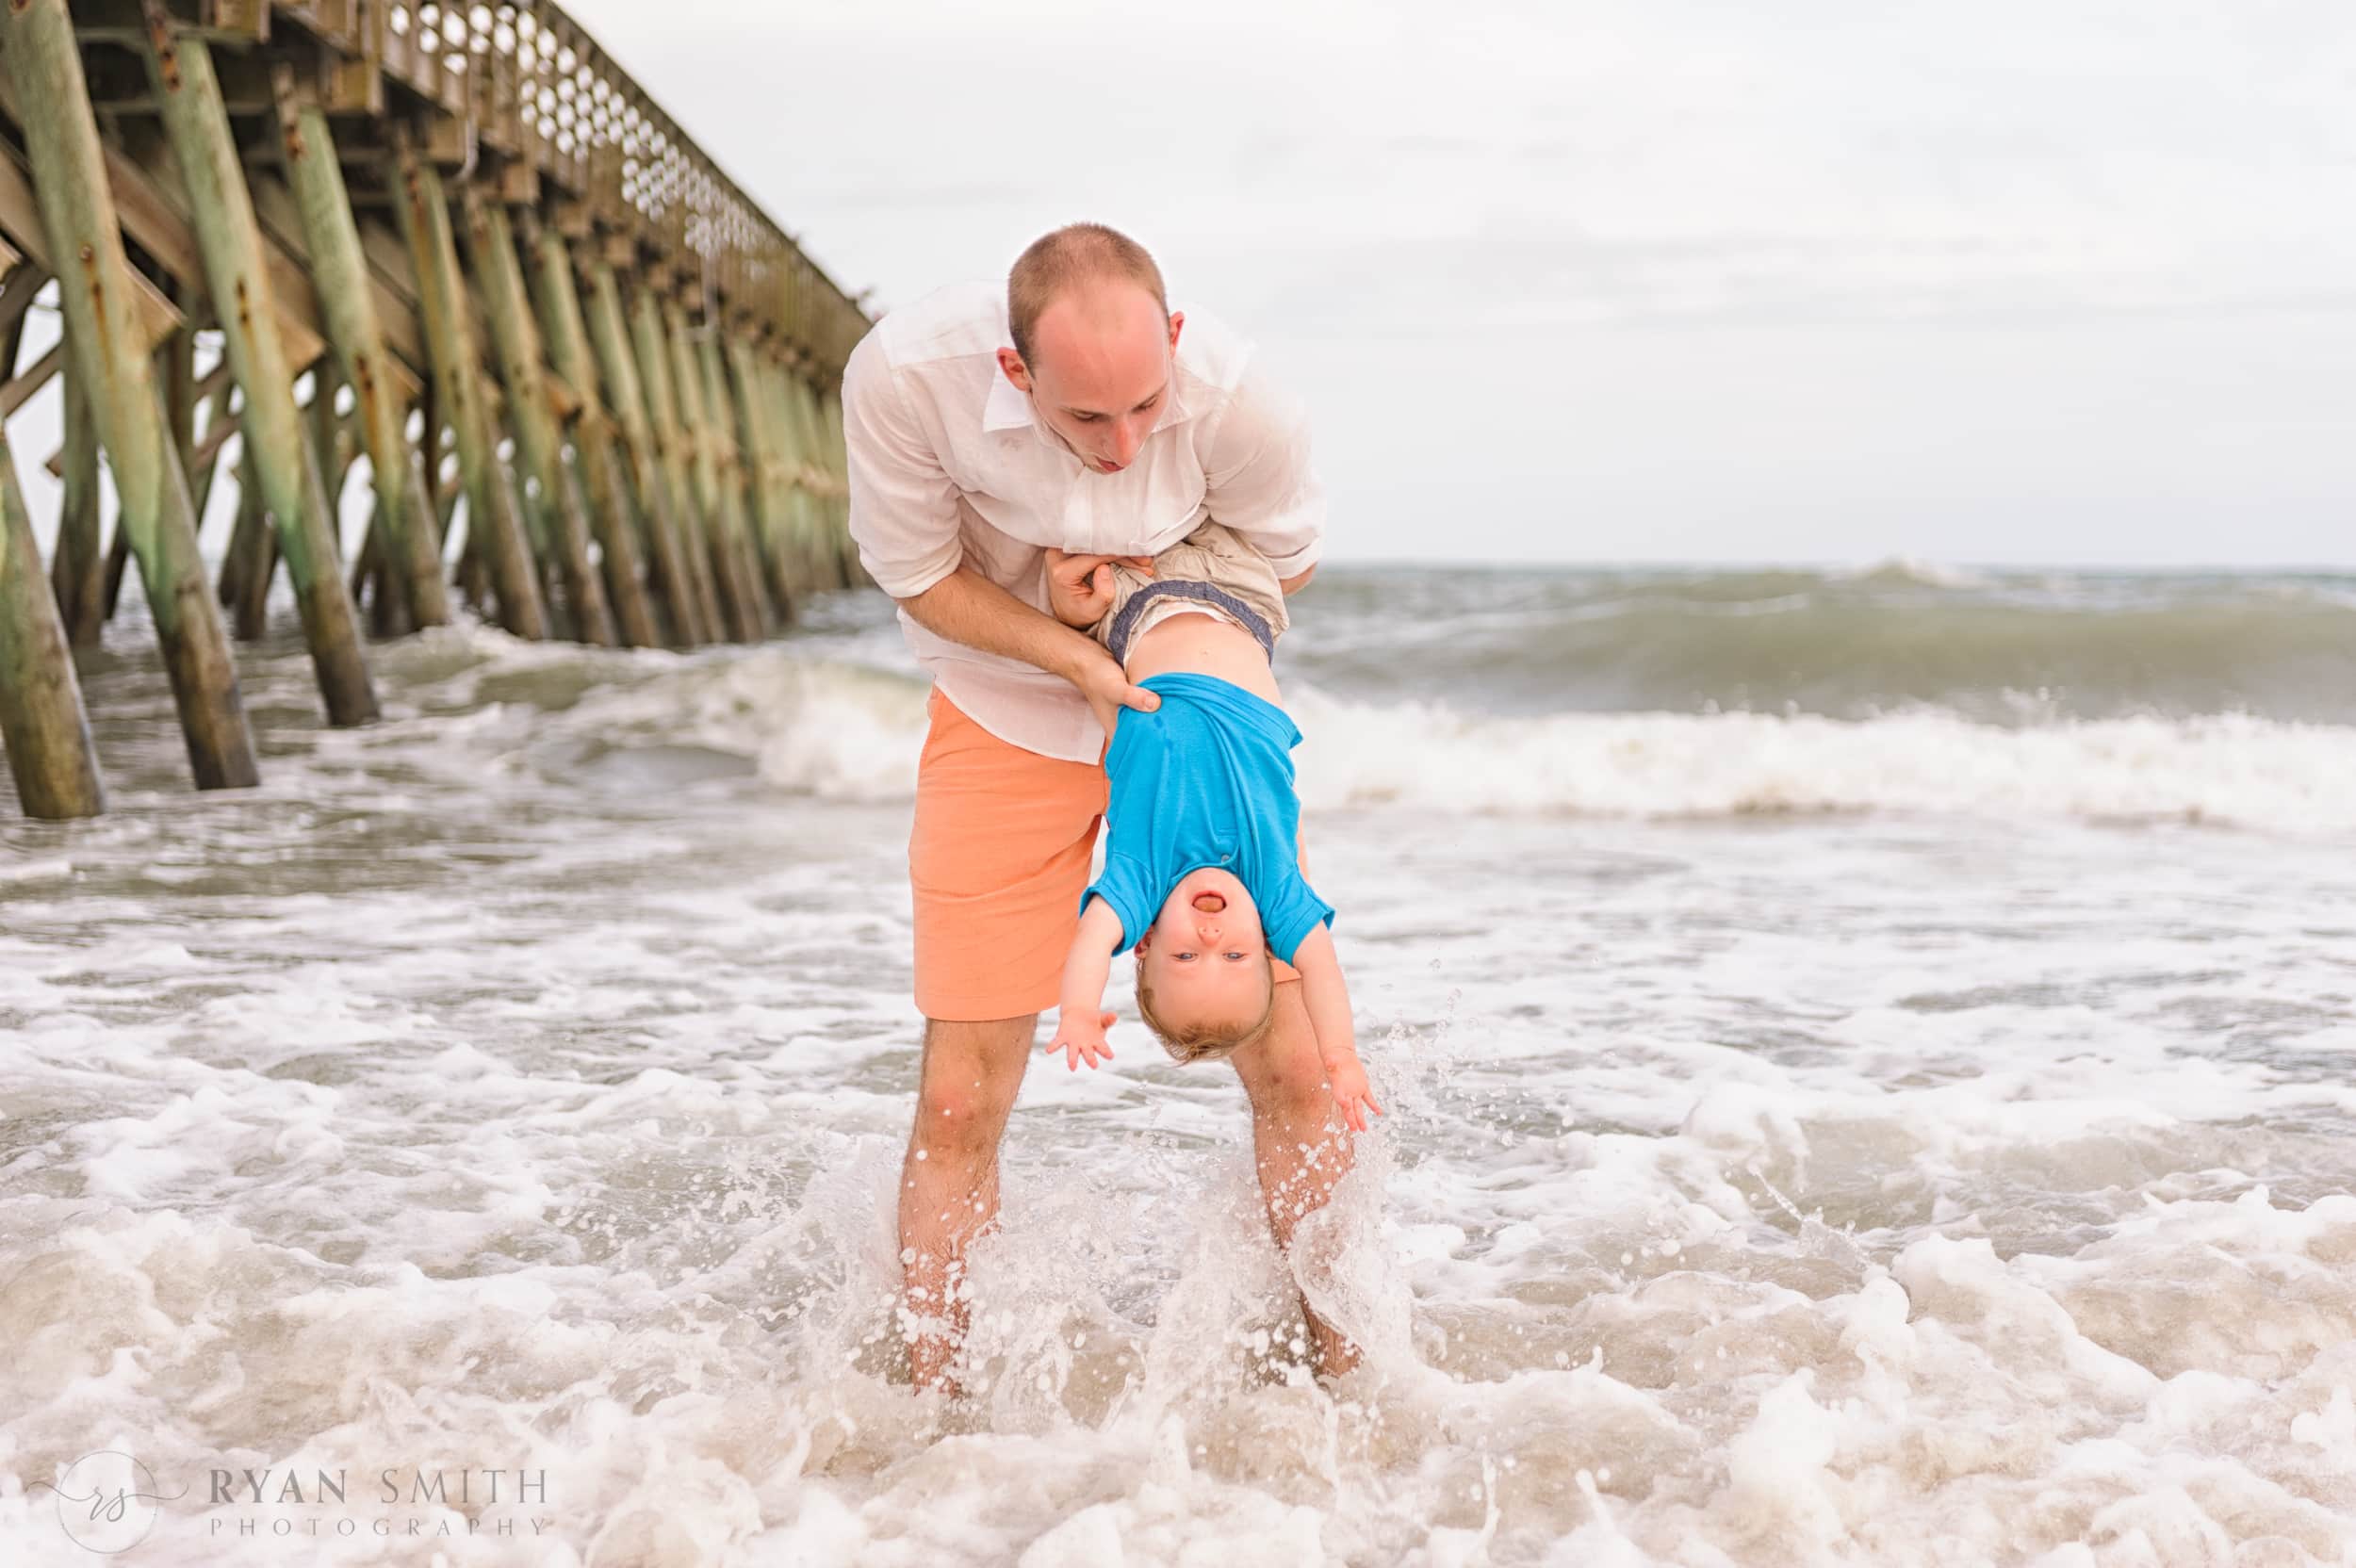 Having fun with his uncle holding him upside down Myrtle Beach State Park